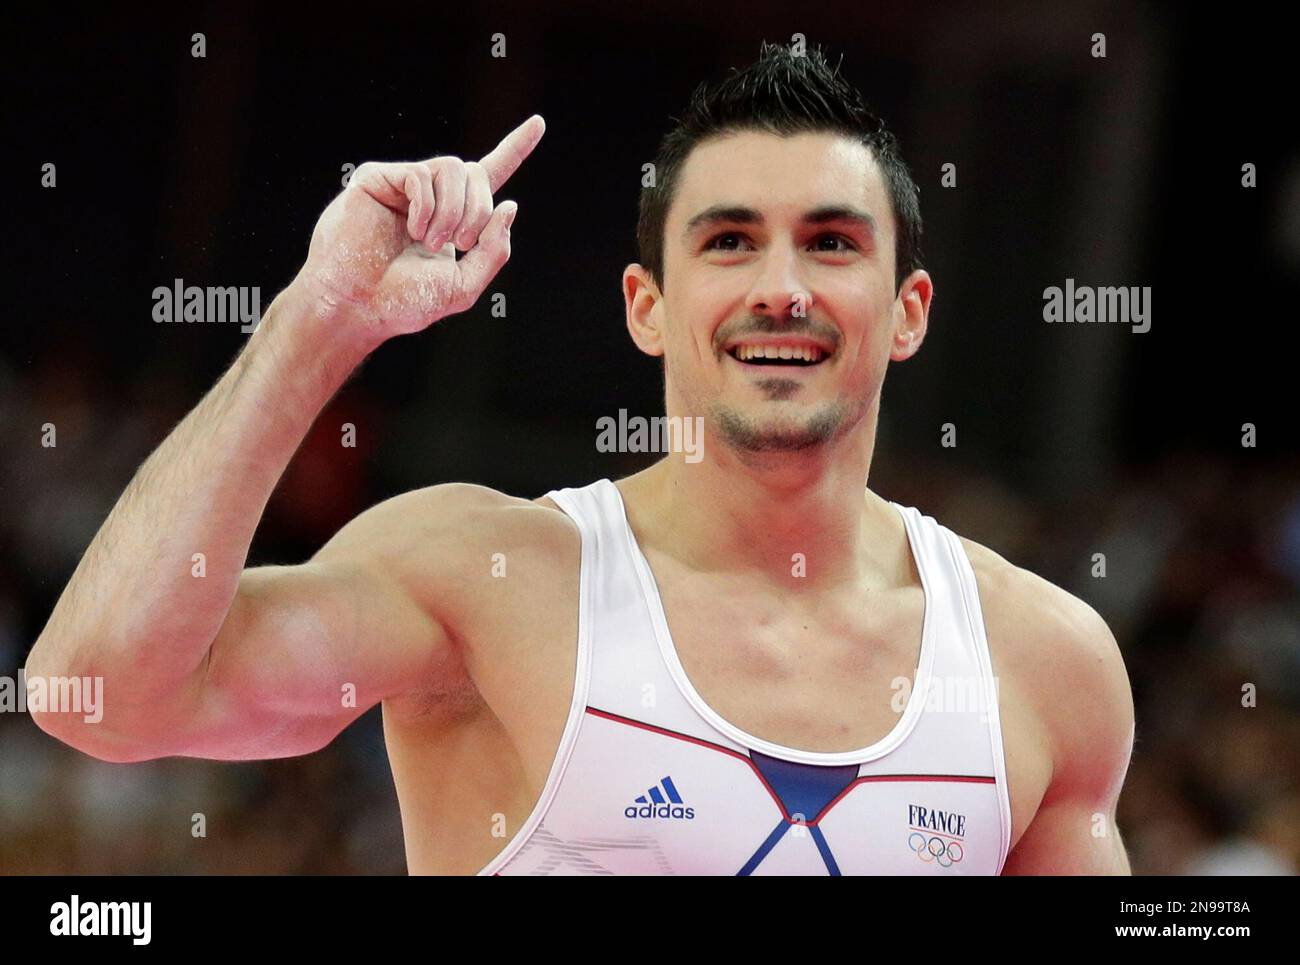 Gymnast Hamilton Sabot from France celebrates after his performance on the  parallel bars during the artistic gymnastics men's apparatus finals at the  2012 Summer Olympics, Tuesday, Aug. 7, 2012, in London. (AP